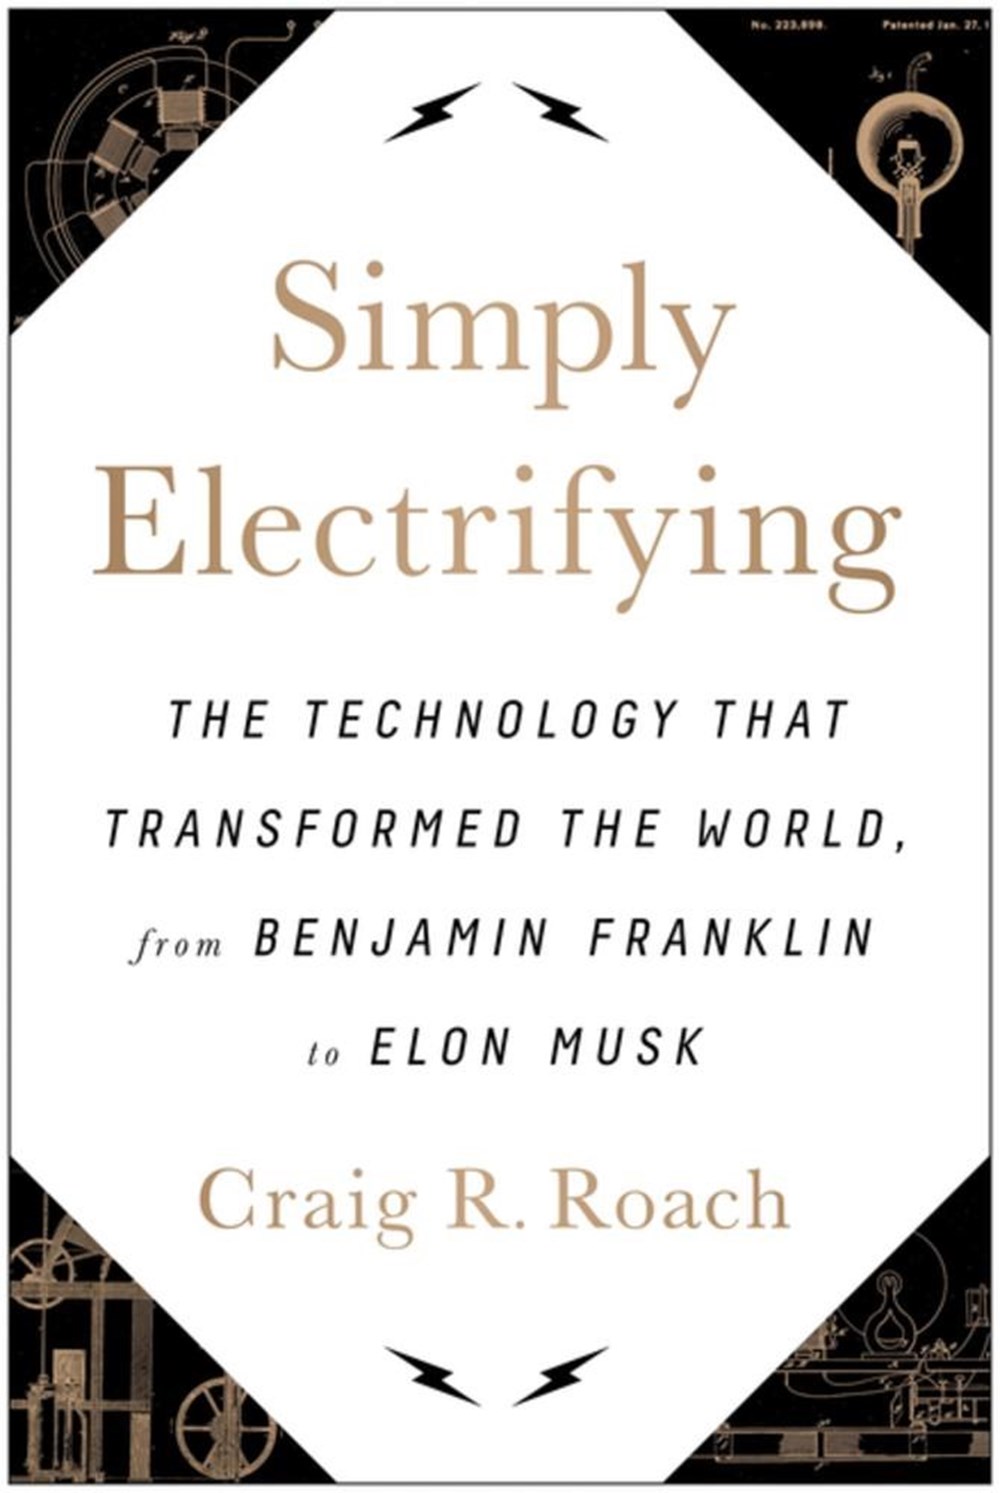 Simply Electrifying The Technology That Transformed the World, from Benjamin Franklin to Elon Musk